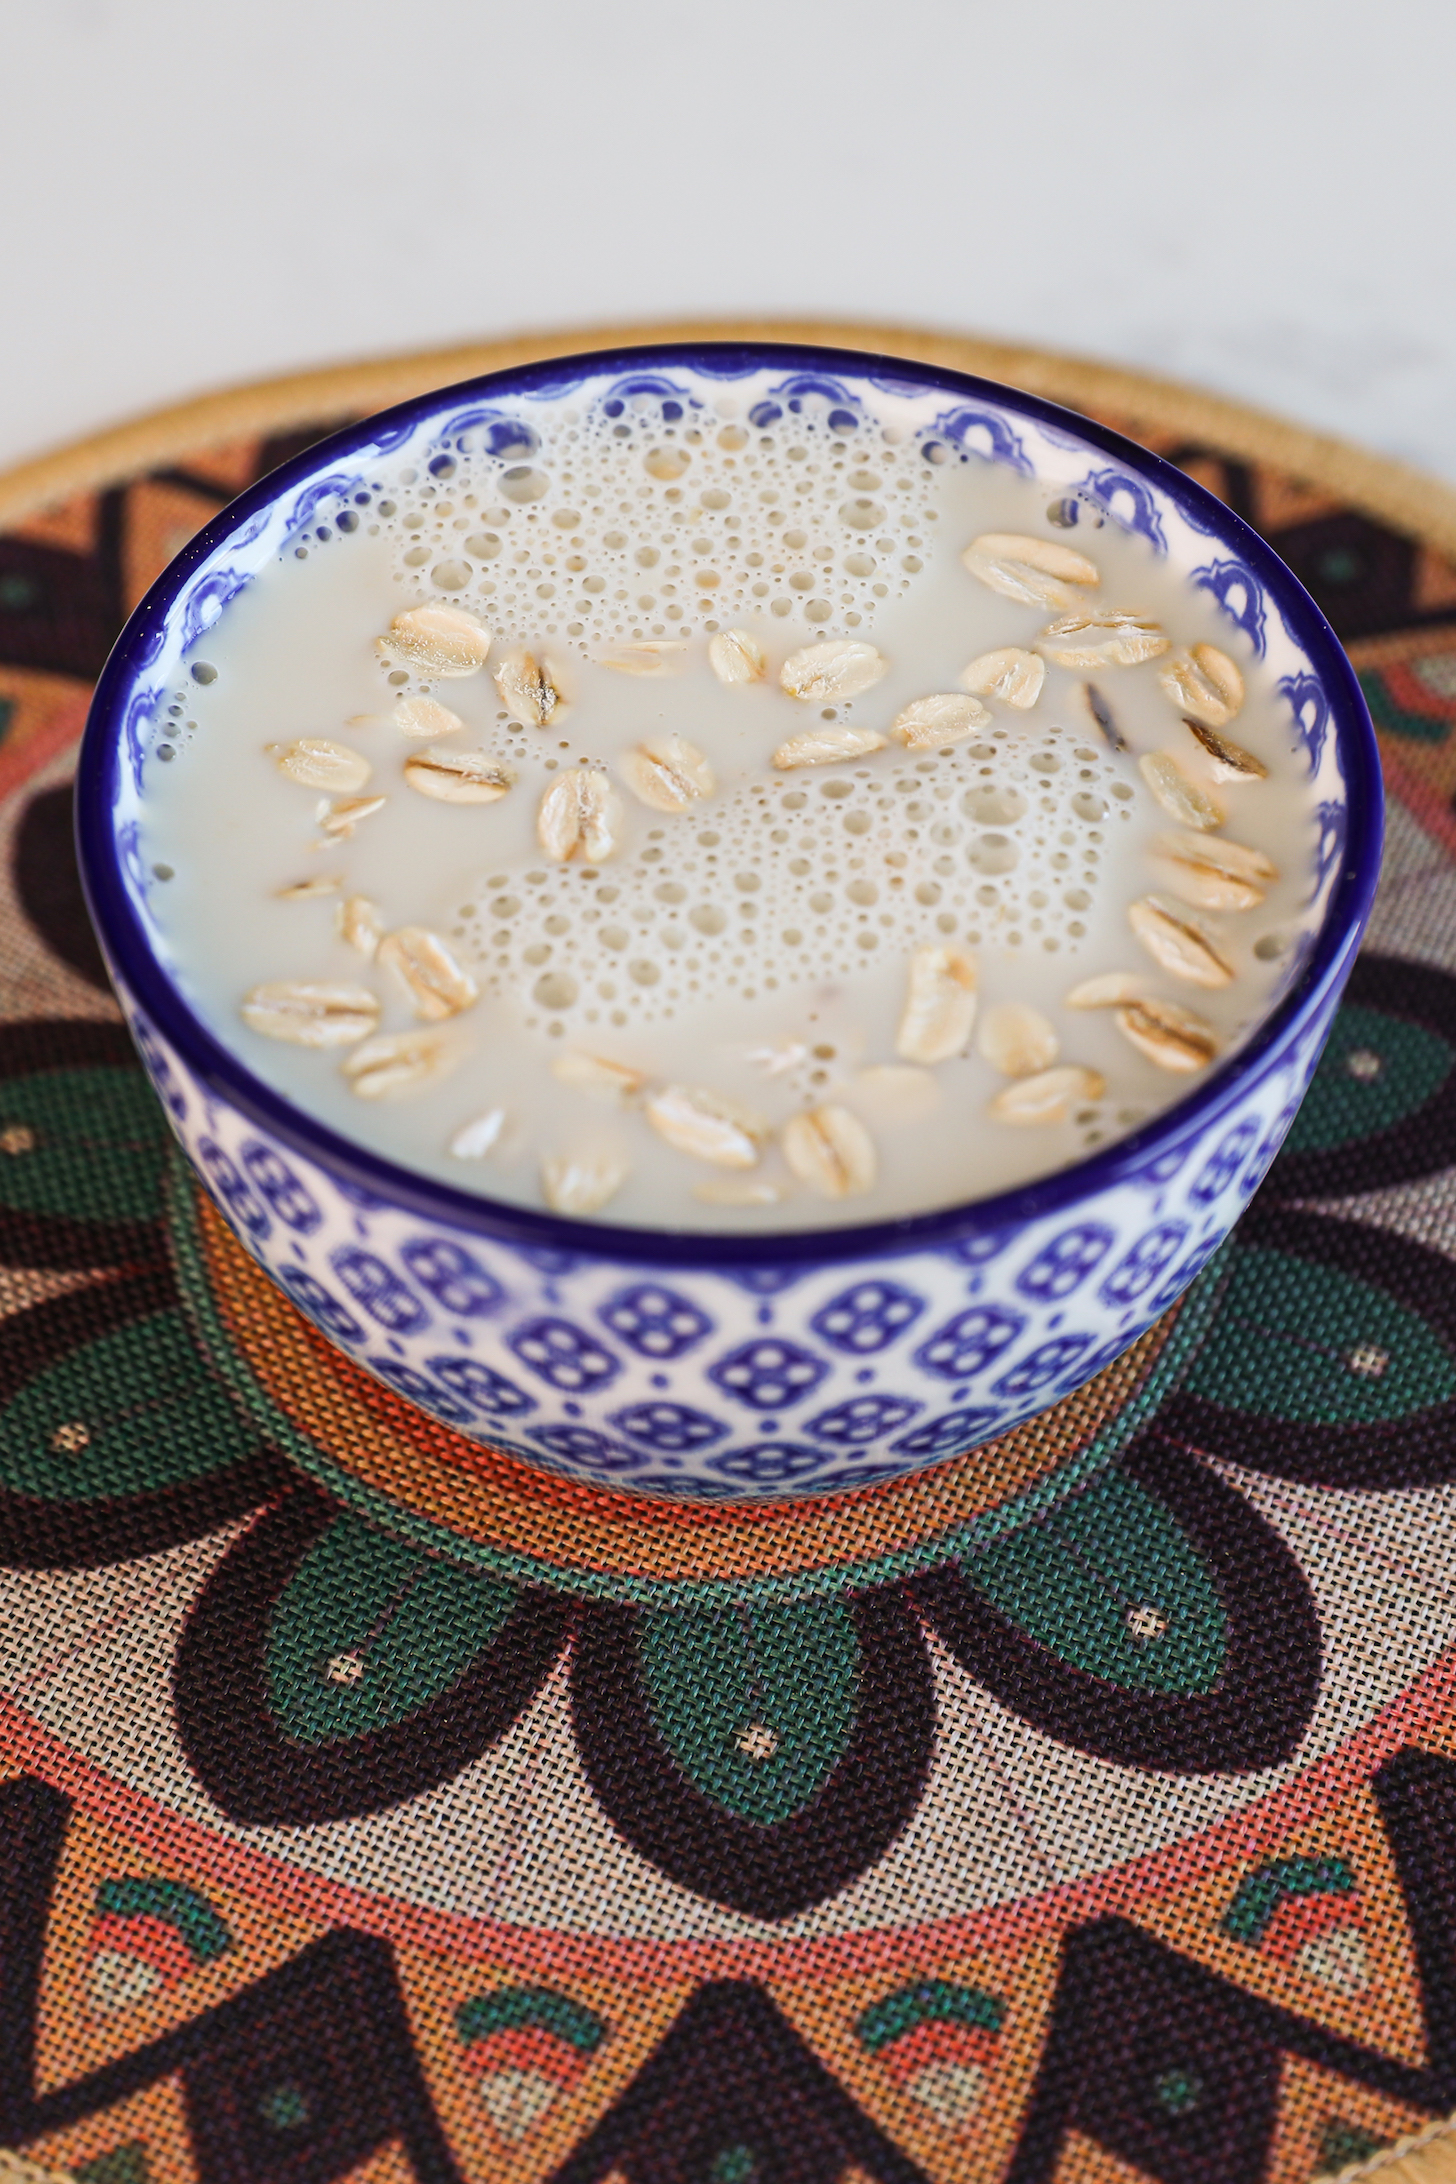 A ramekin of oats soaked in milk placed on a floral mat.